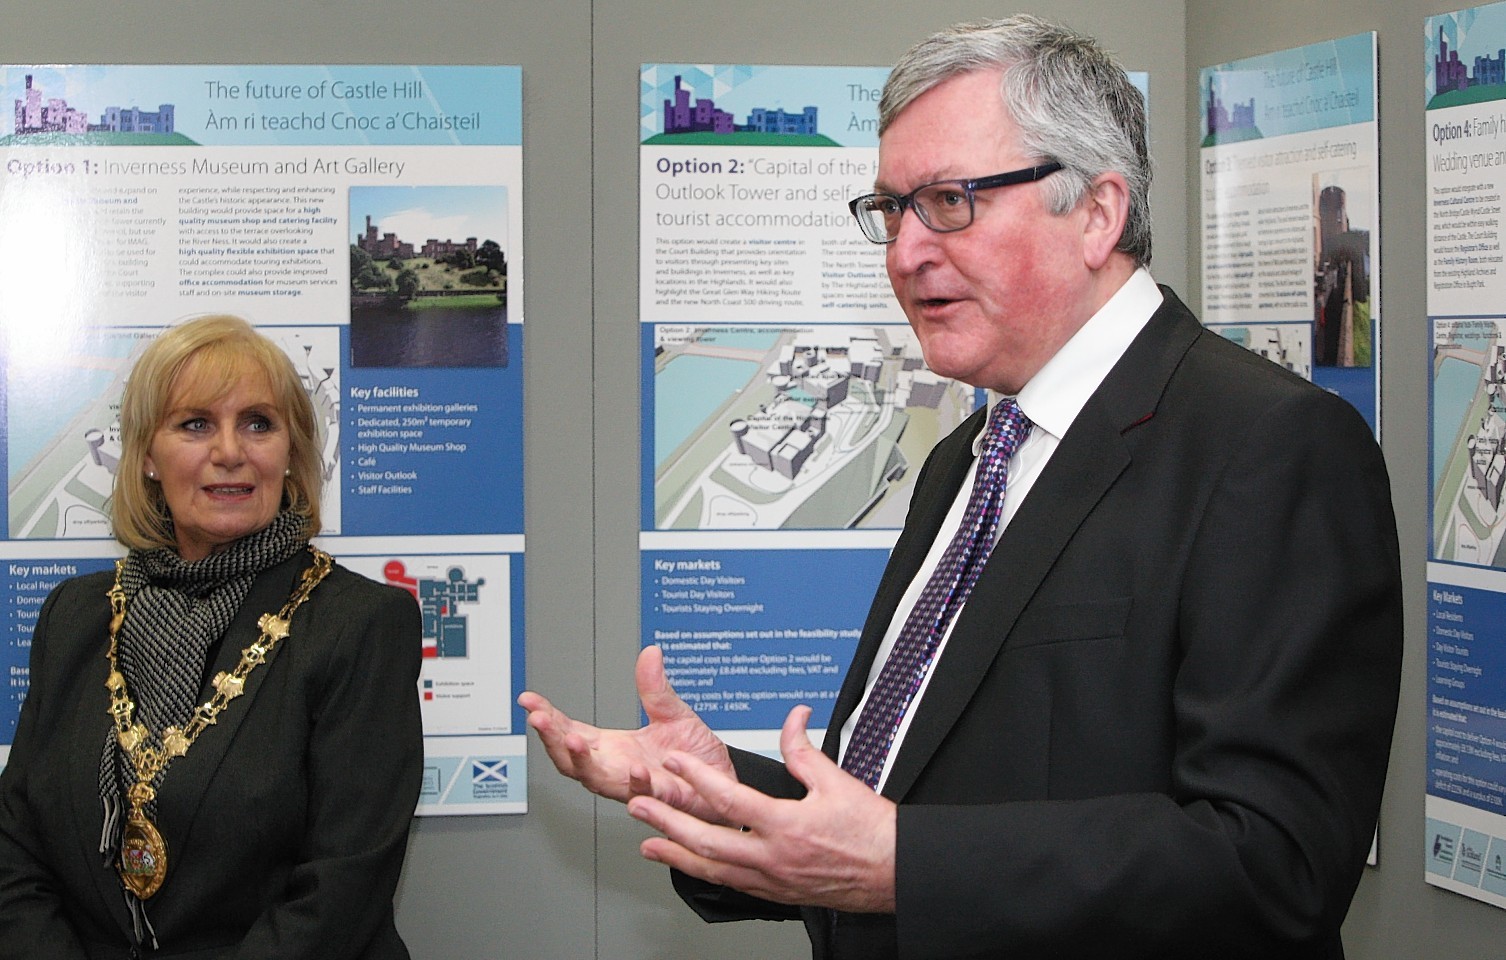 ergus Ewing (Minister for Business, Energy and Tourism) and Helen Carmichael unveil the plans